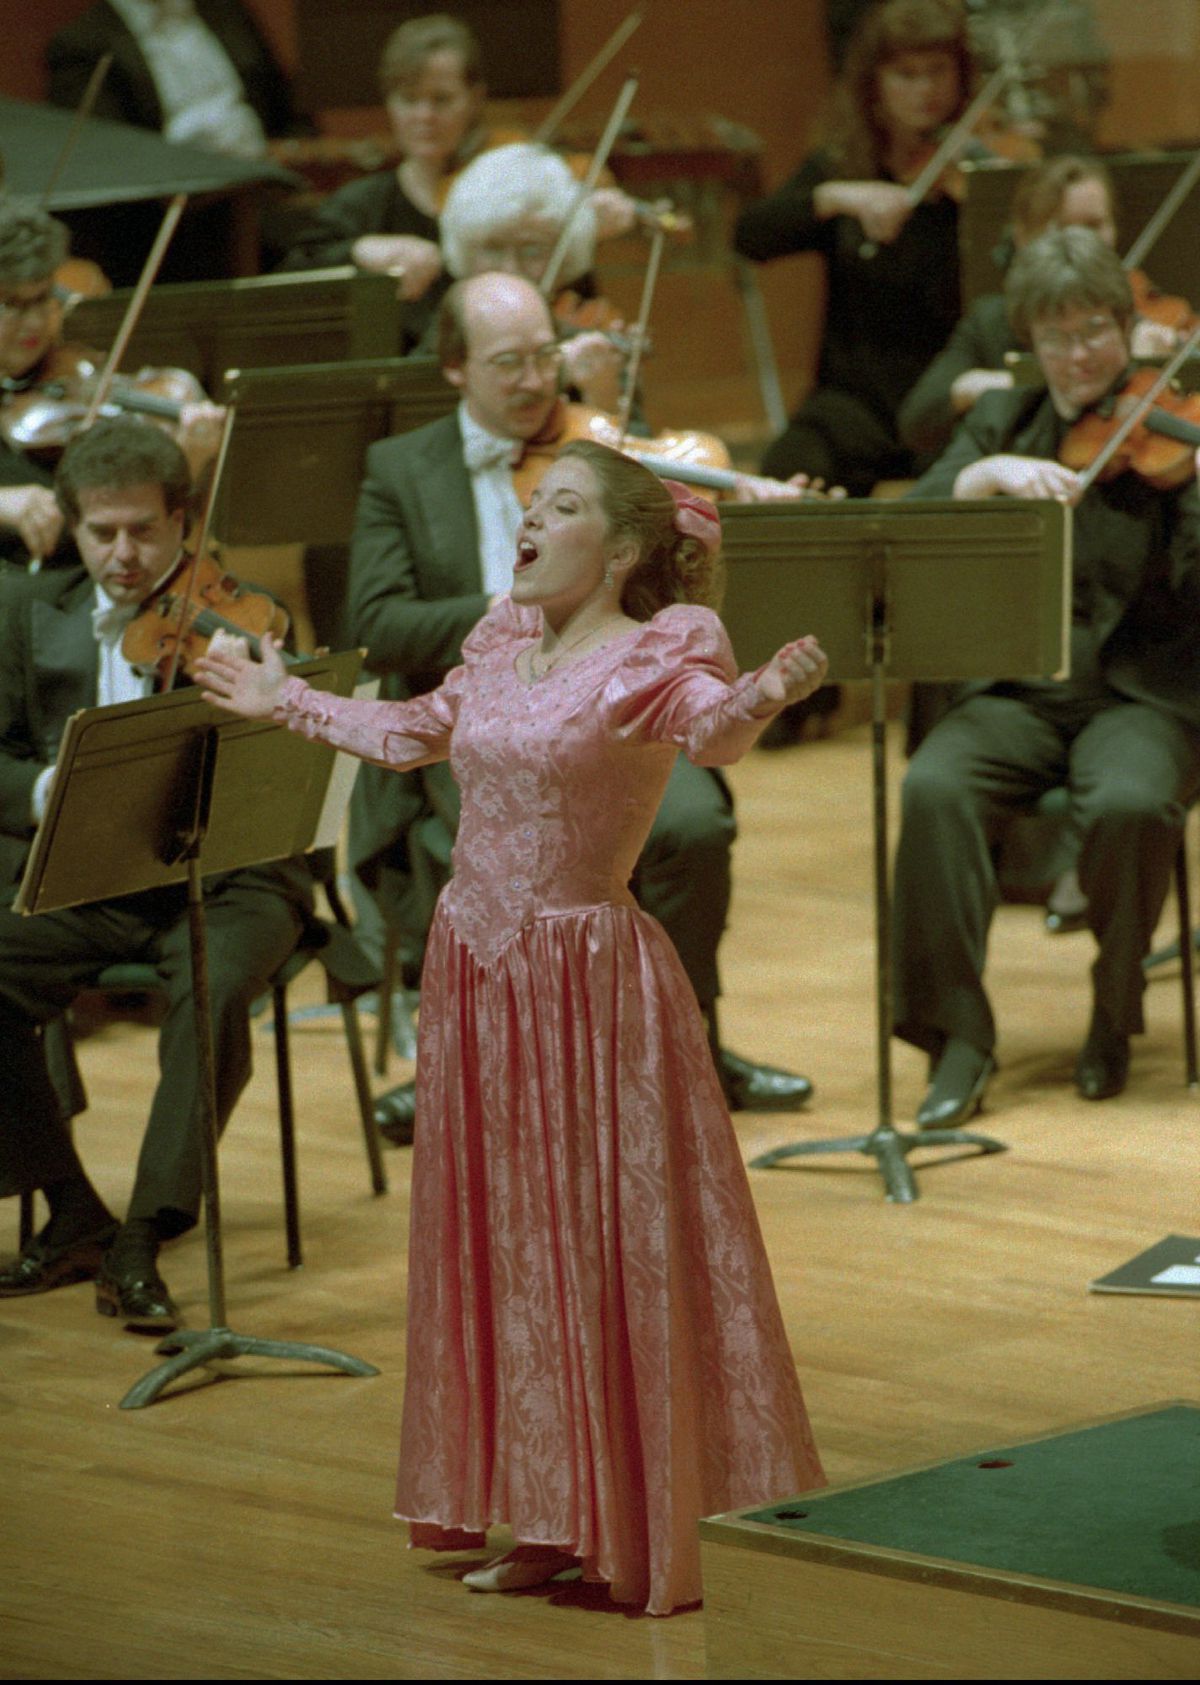 Performing regularly with Utah Opera and the Utah Symphony has brought things full-circle for soprano Celena Shafer, who debuted with the symphony in 1992 as a Salute to Youth soloist when she was a 17-year-old senior at Viewmont High School.